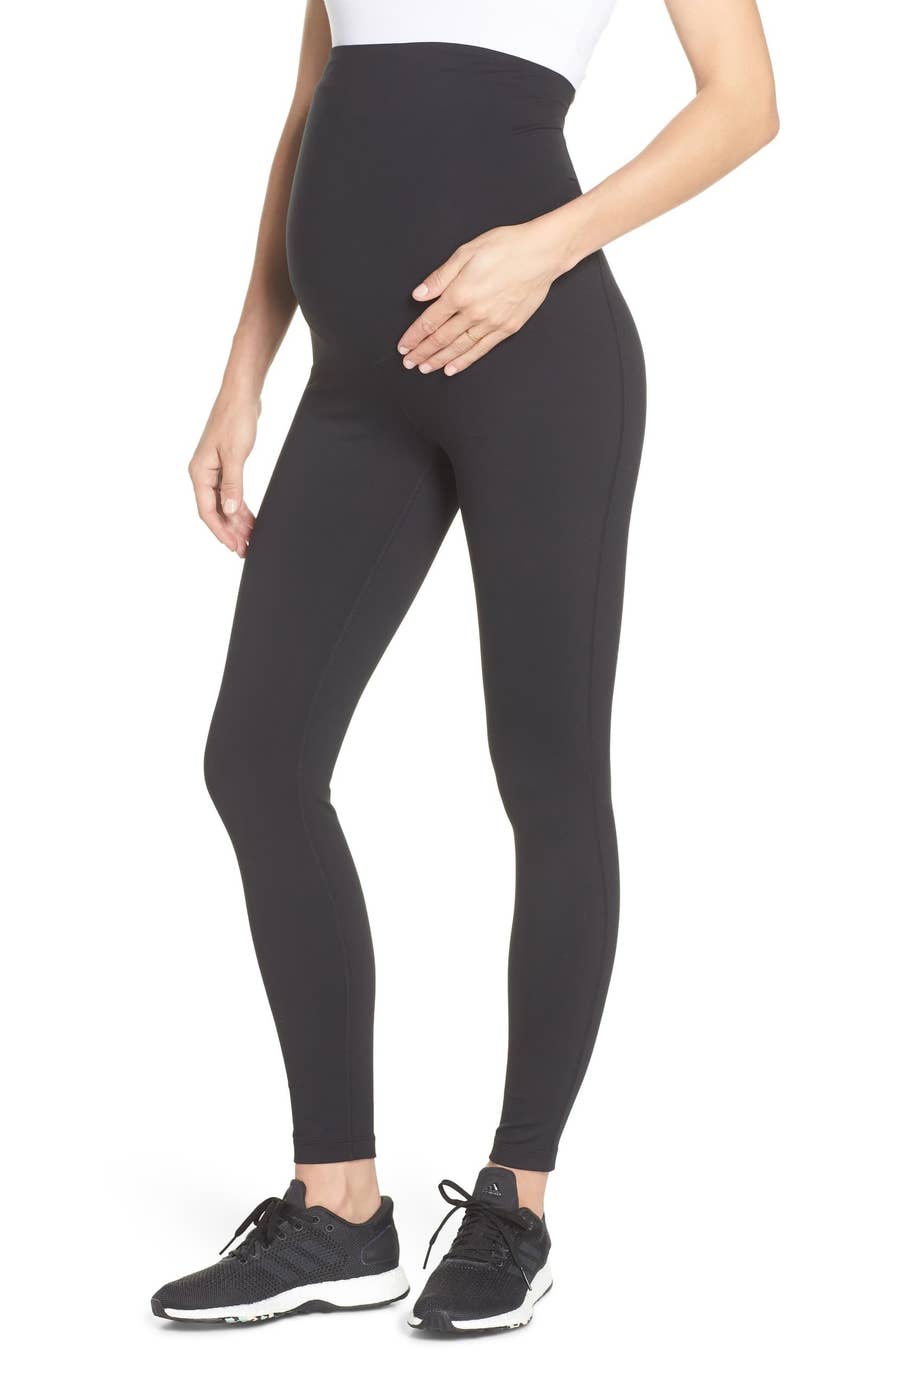 Ladies And Gents, I've Done The Tests And Nordstrom Makes The Best Leggings  For Lounging Around